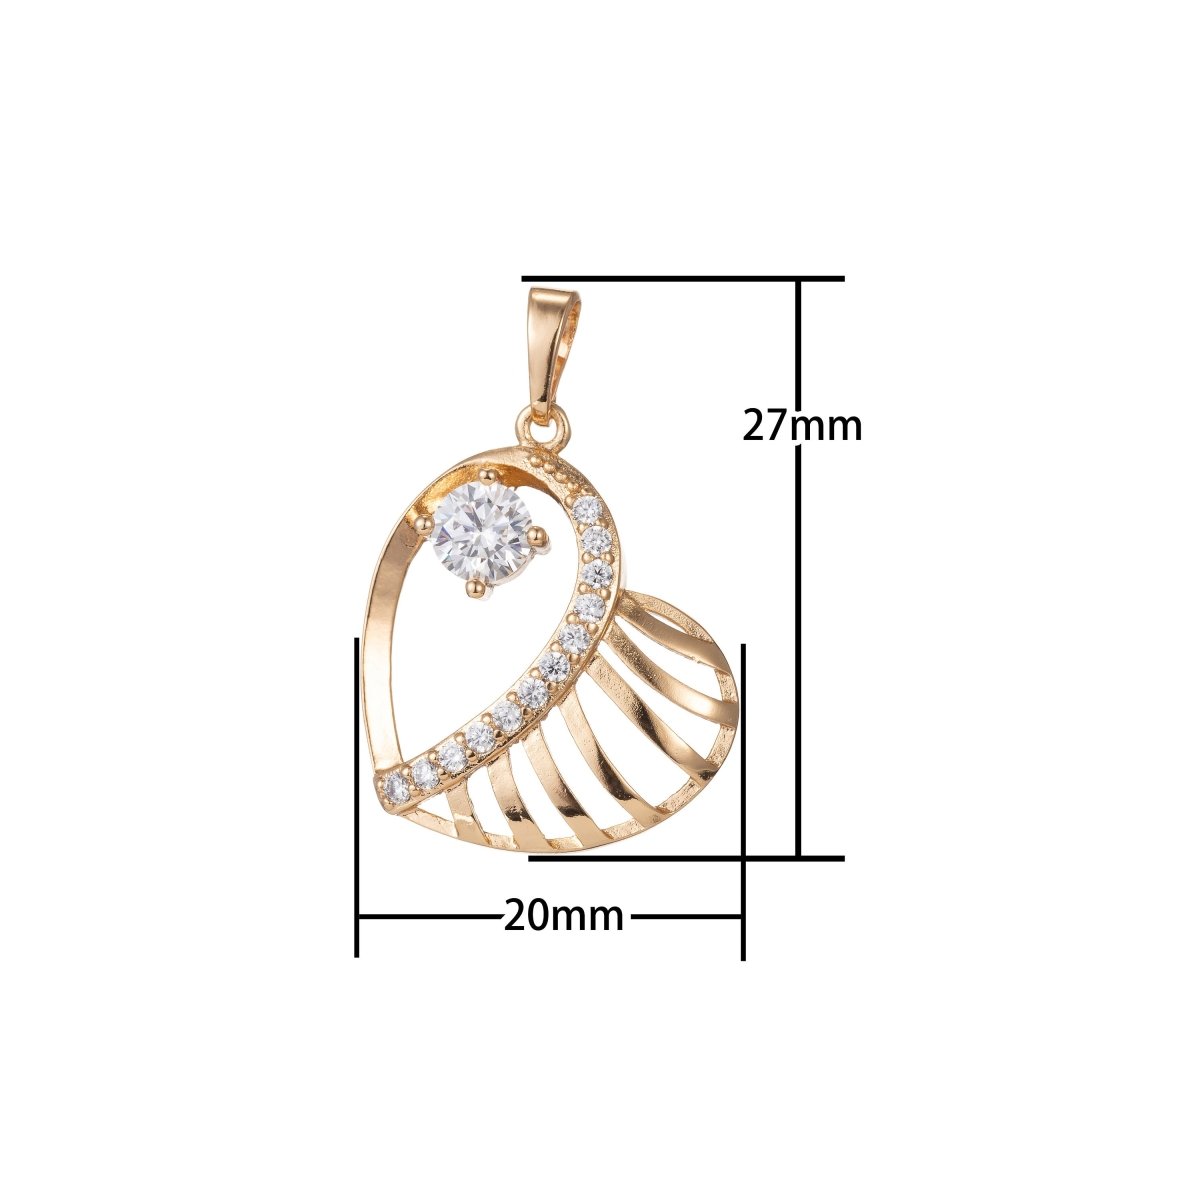 18K Gold Filled Micro Pave CZ Pendant Charm, Hearts with Micro Pave CZ Pendant Charm, Gold Filled Heart Pendant, For DIY Jewelry I-401 I-495 - DLUXCA